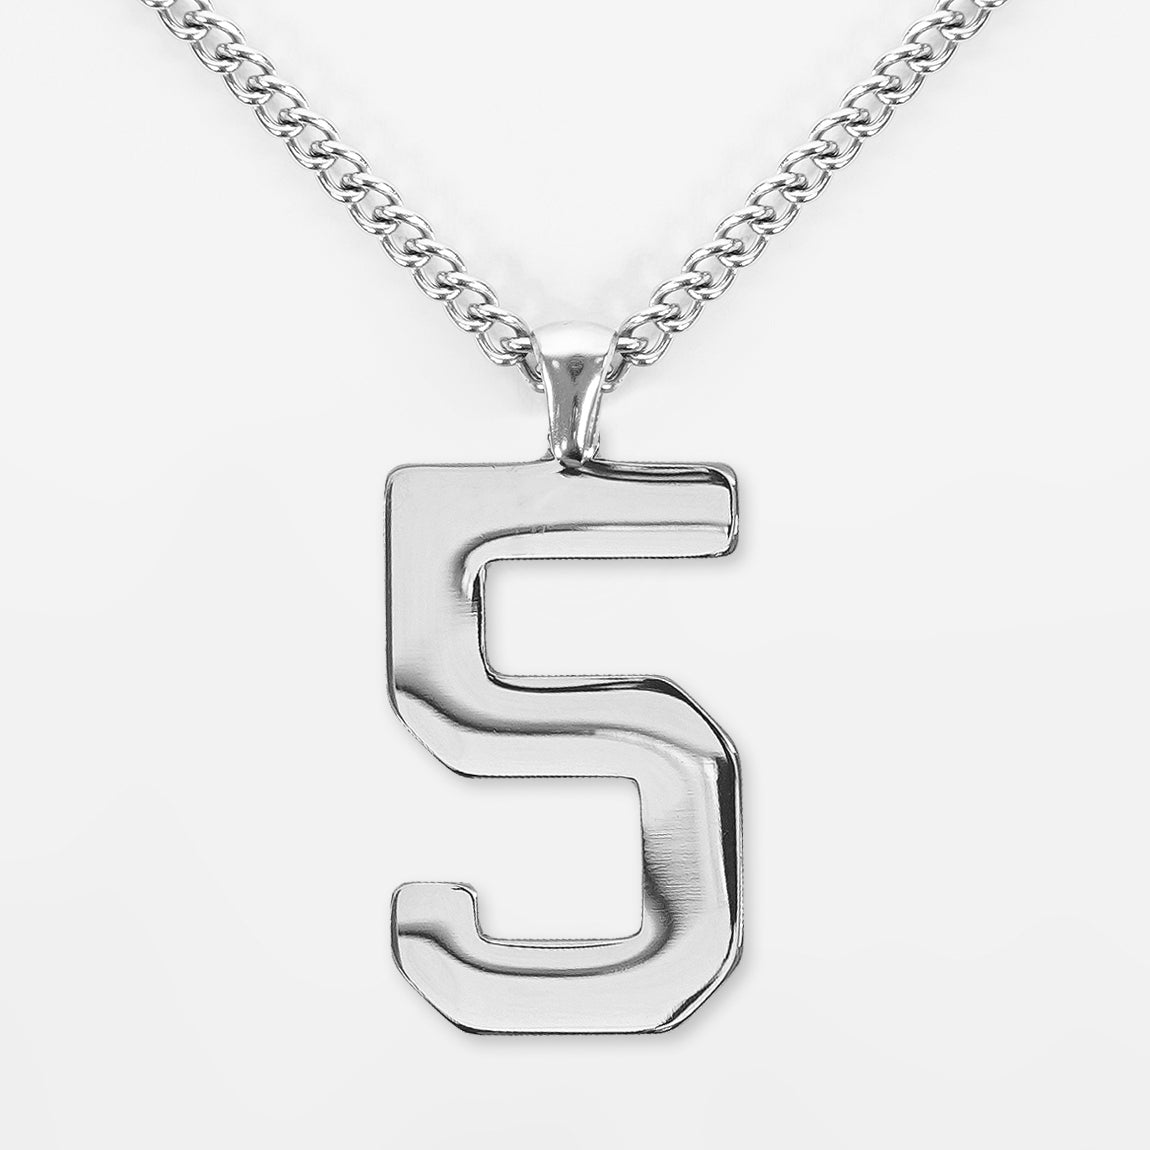 5 Number Pendant with Chain Necklace - Stainless Steel